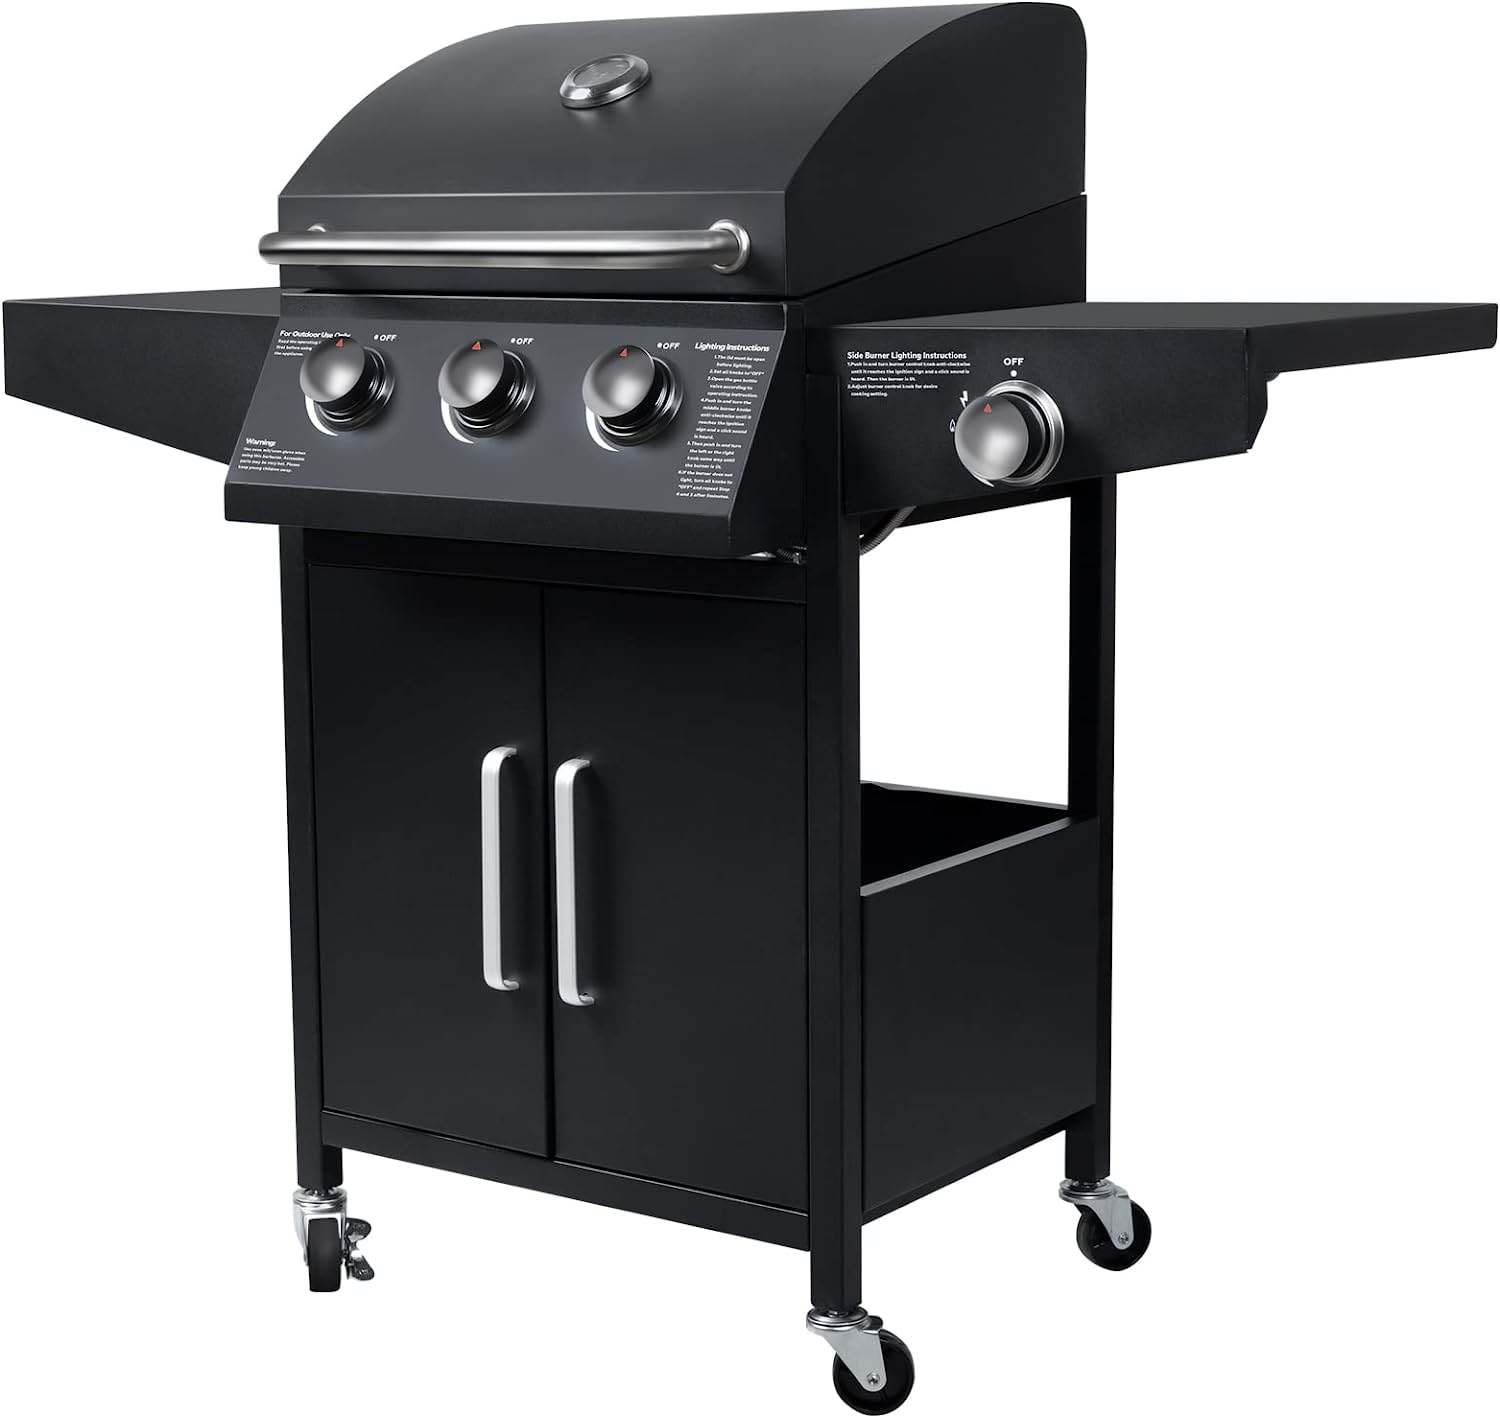 FULLWATT Propane Gas Grill, Stainless Steel Liquid Propane Gas Grill with Side Burner, Cabinet Style BBQ Grill Gas for Outdoor, Patio, Garden (4 BURNER) - image 1 of 7